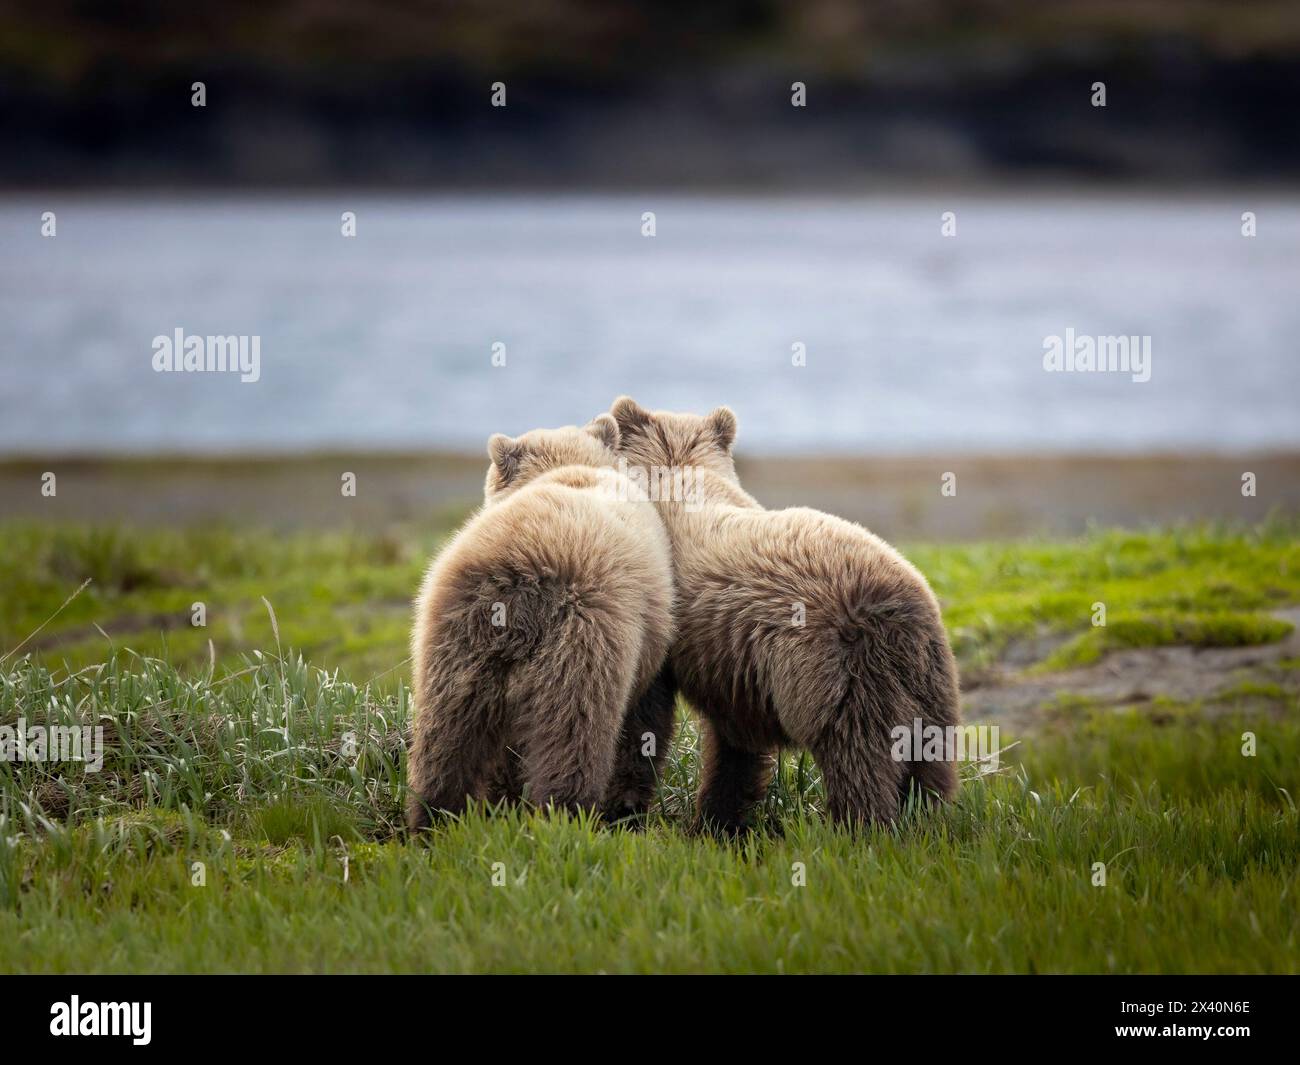 Yearling Brown bear siblings (Ursus arctos) take a break from roughhousing near McNeil River, Alaska, while their mother feeds nearby on sedges. Br... Stock Photo